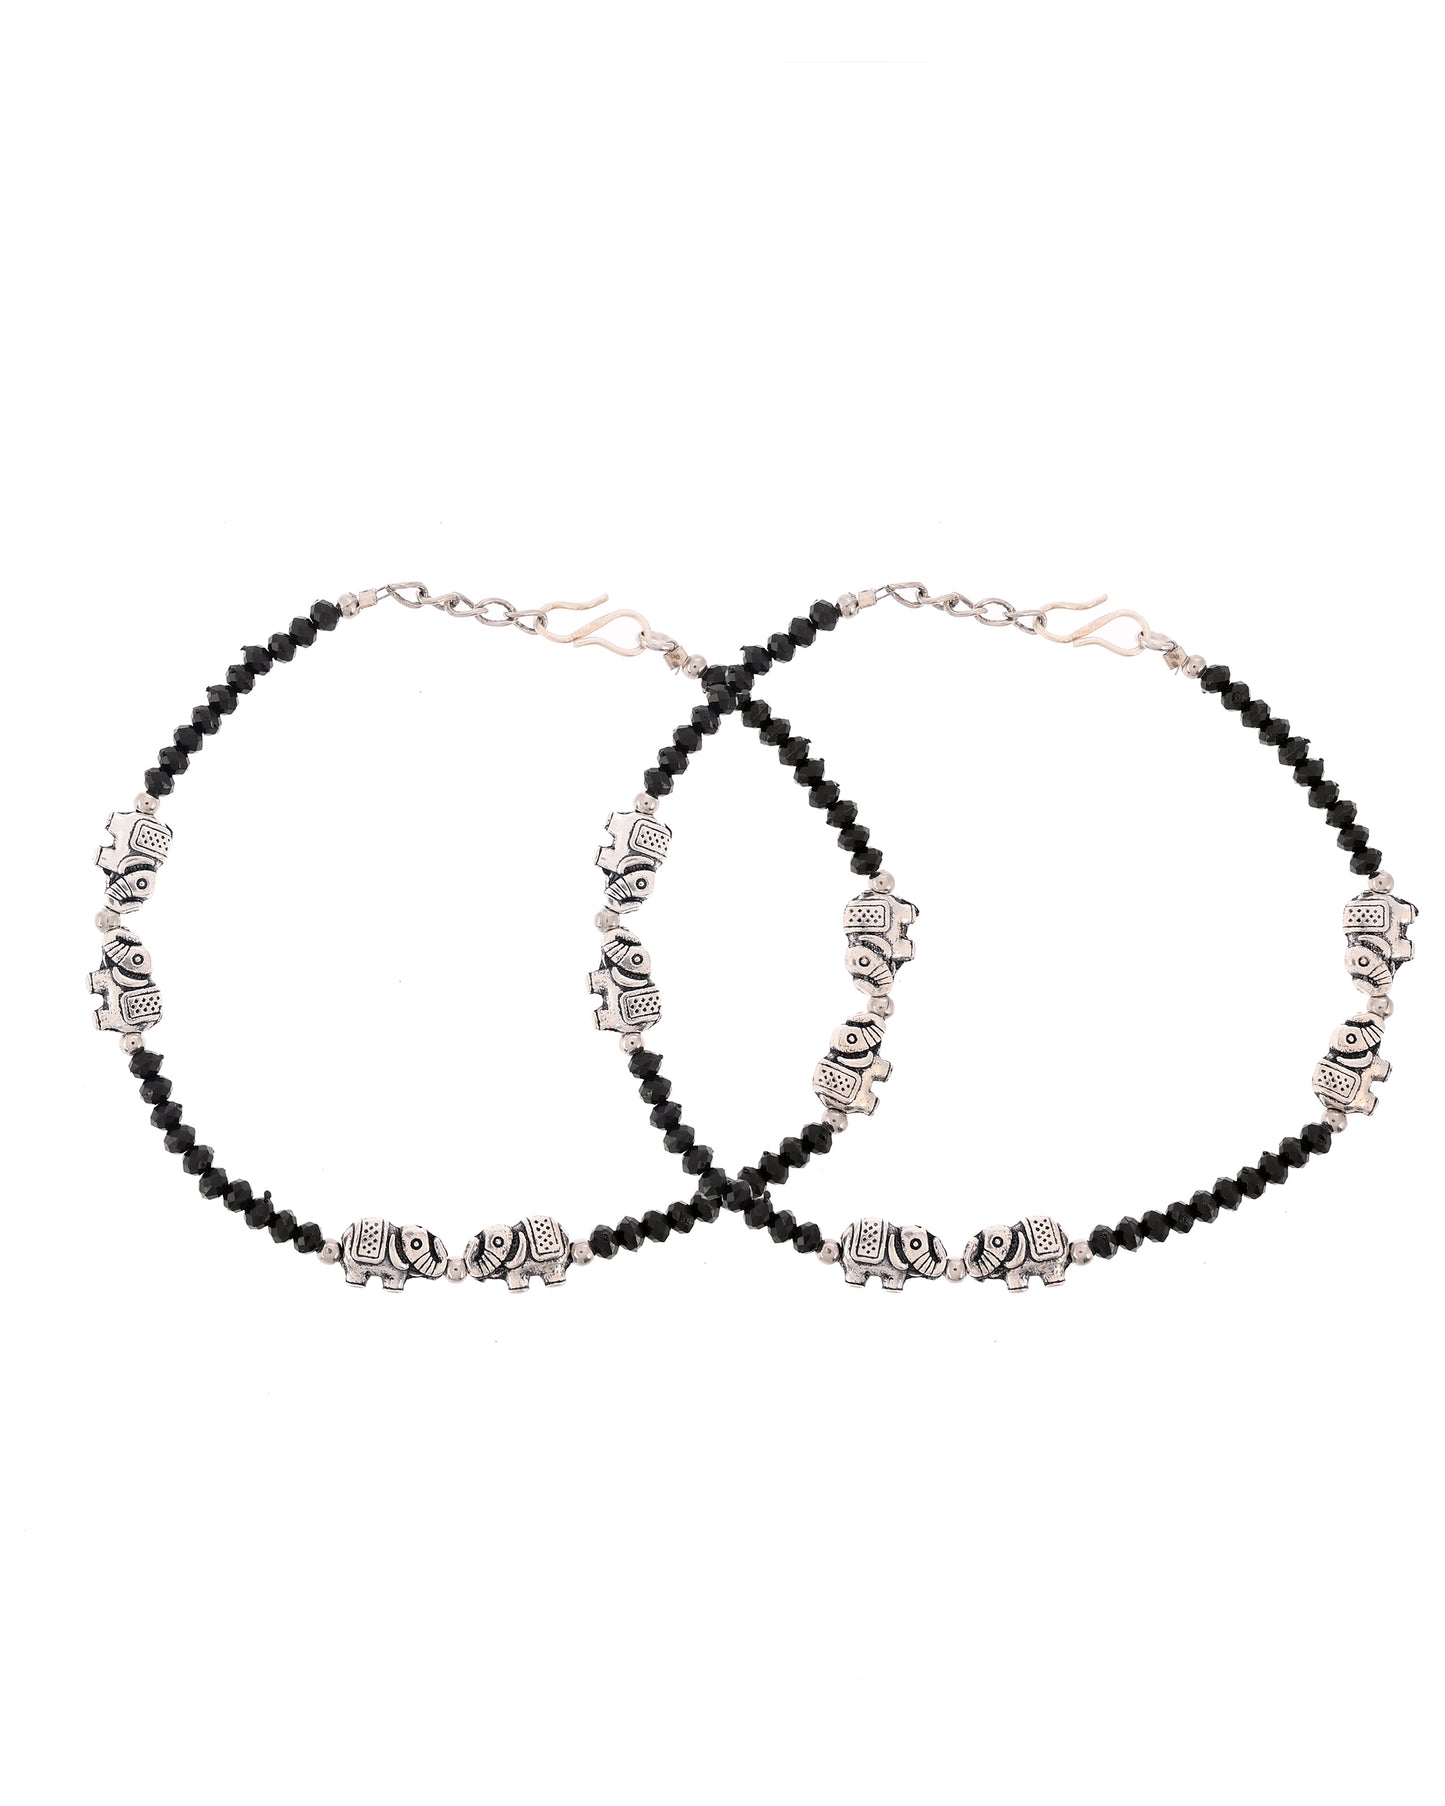 Silver Plated oxidized Black Beads Anklet With Elephant Charm